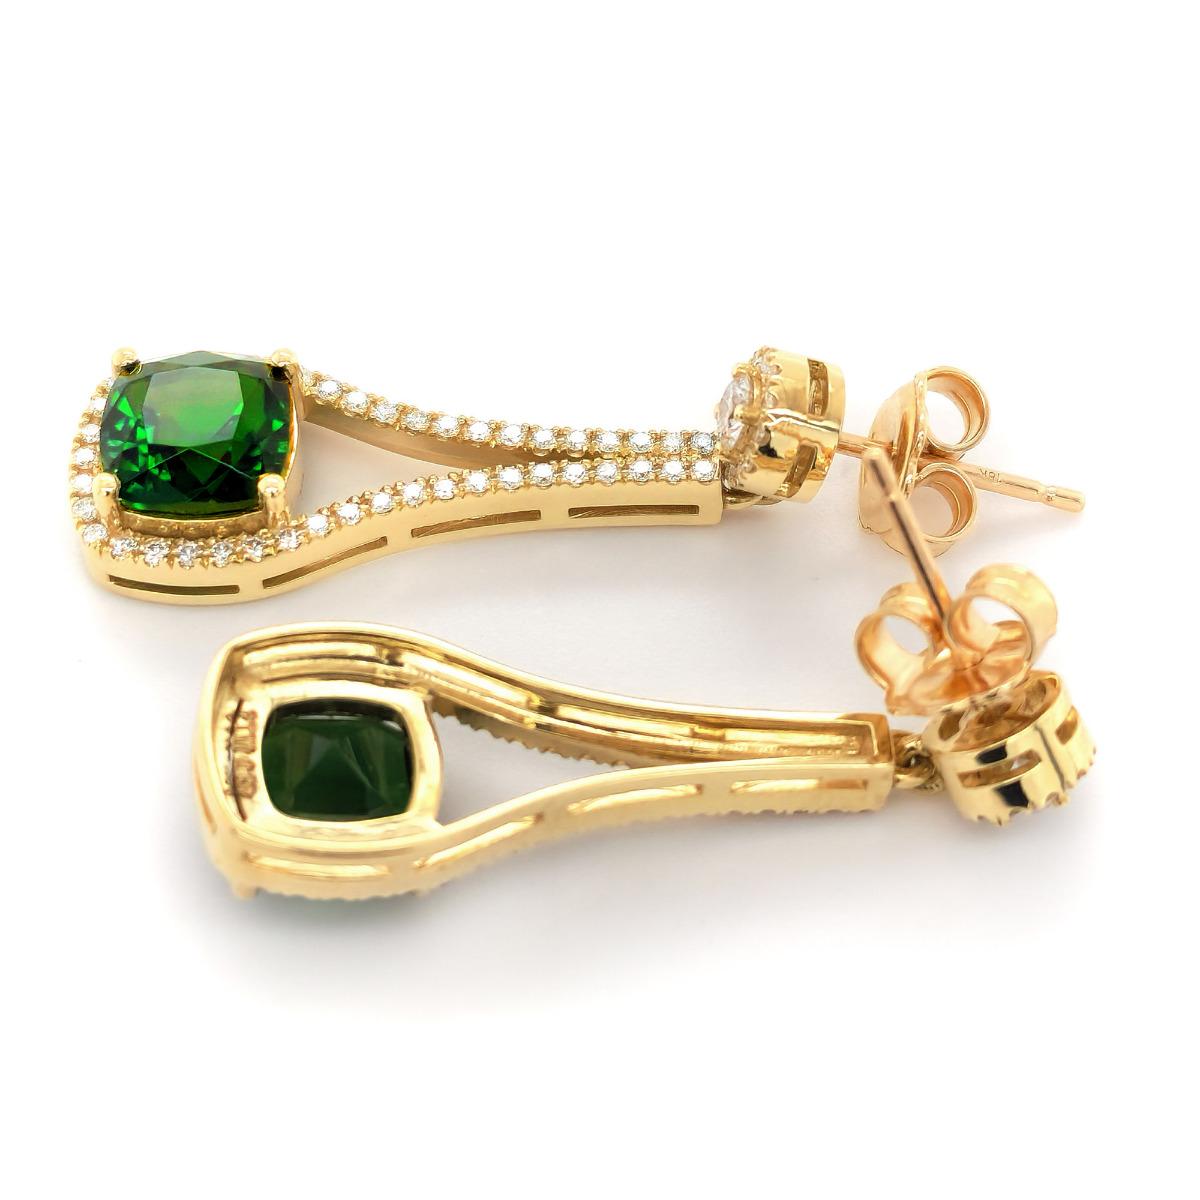 Mixed Cut Natural Tourmalines 4.57 Carats set in 18K Yellow Gold Earrings with Diamonds For Sale